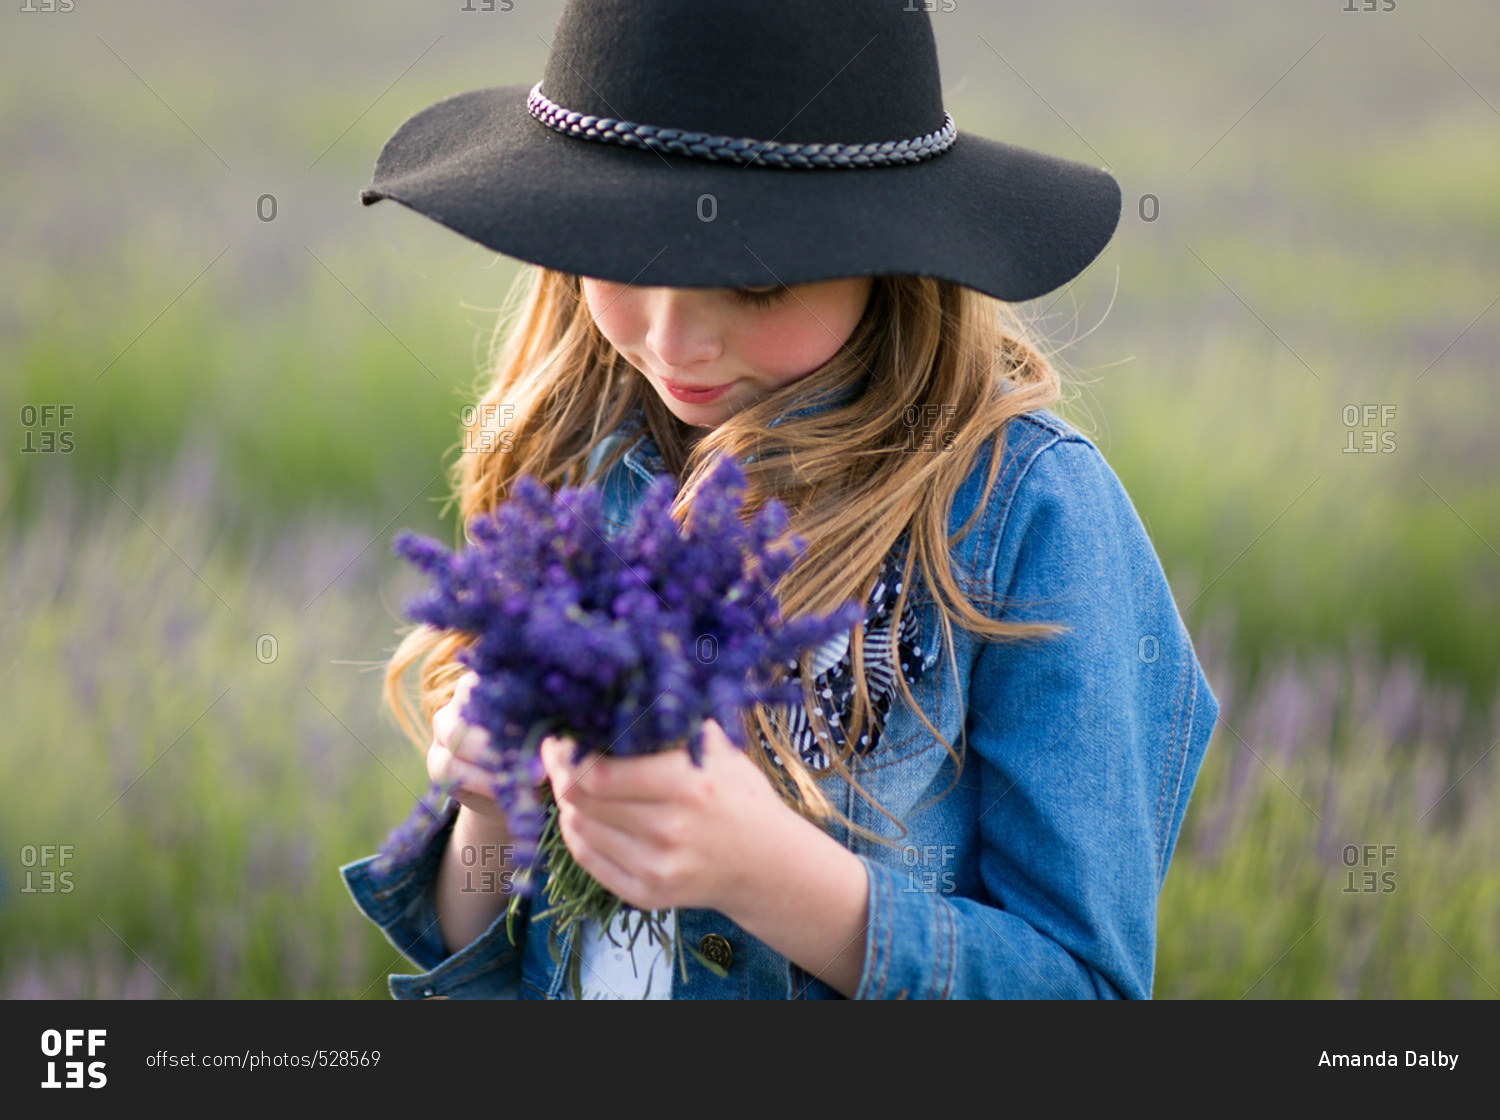 Girl wearing a cowboy hat holding a bunch of freshly picked lavender flowers